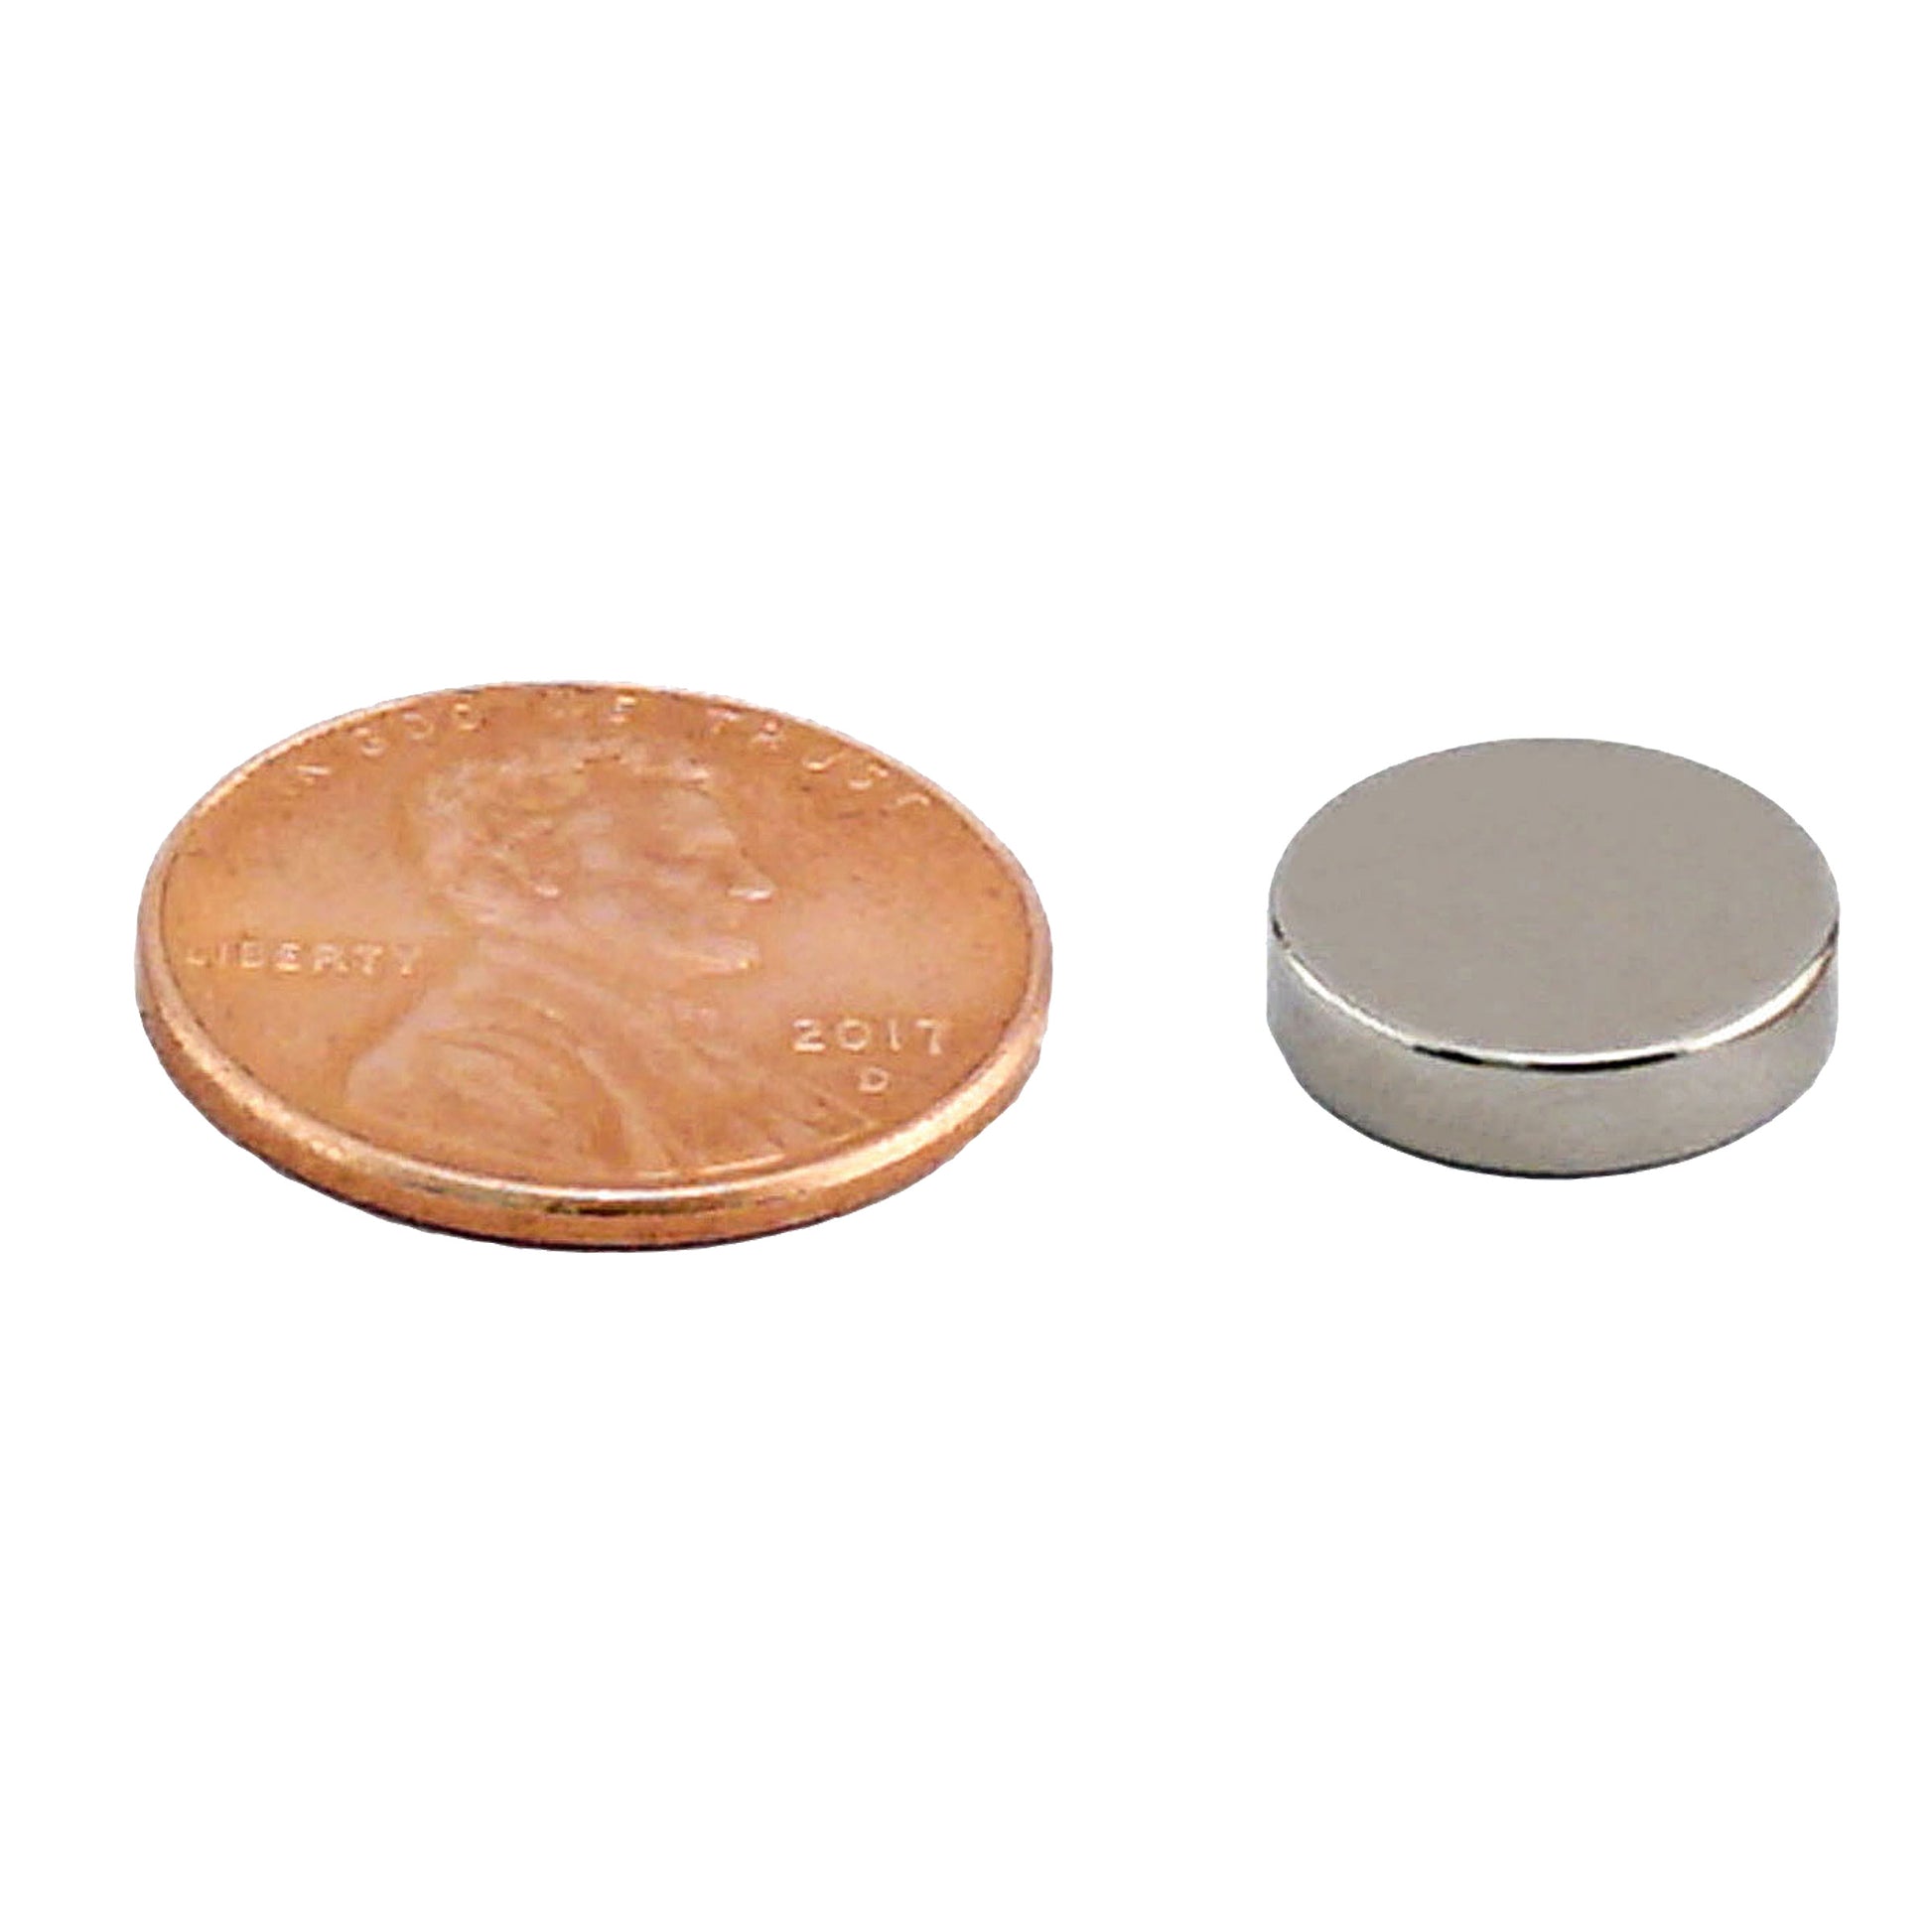 Load image into Gallery viewer, ND45-4711N Neodymium Disc Magnet - Compared to Penny for Size Reference